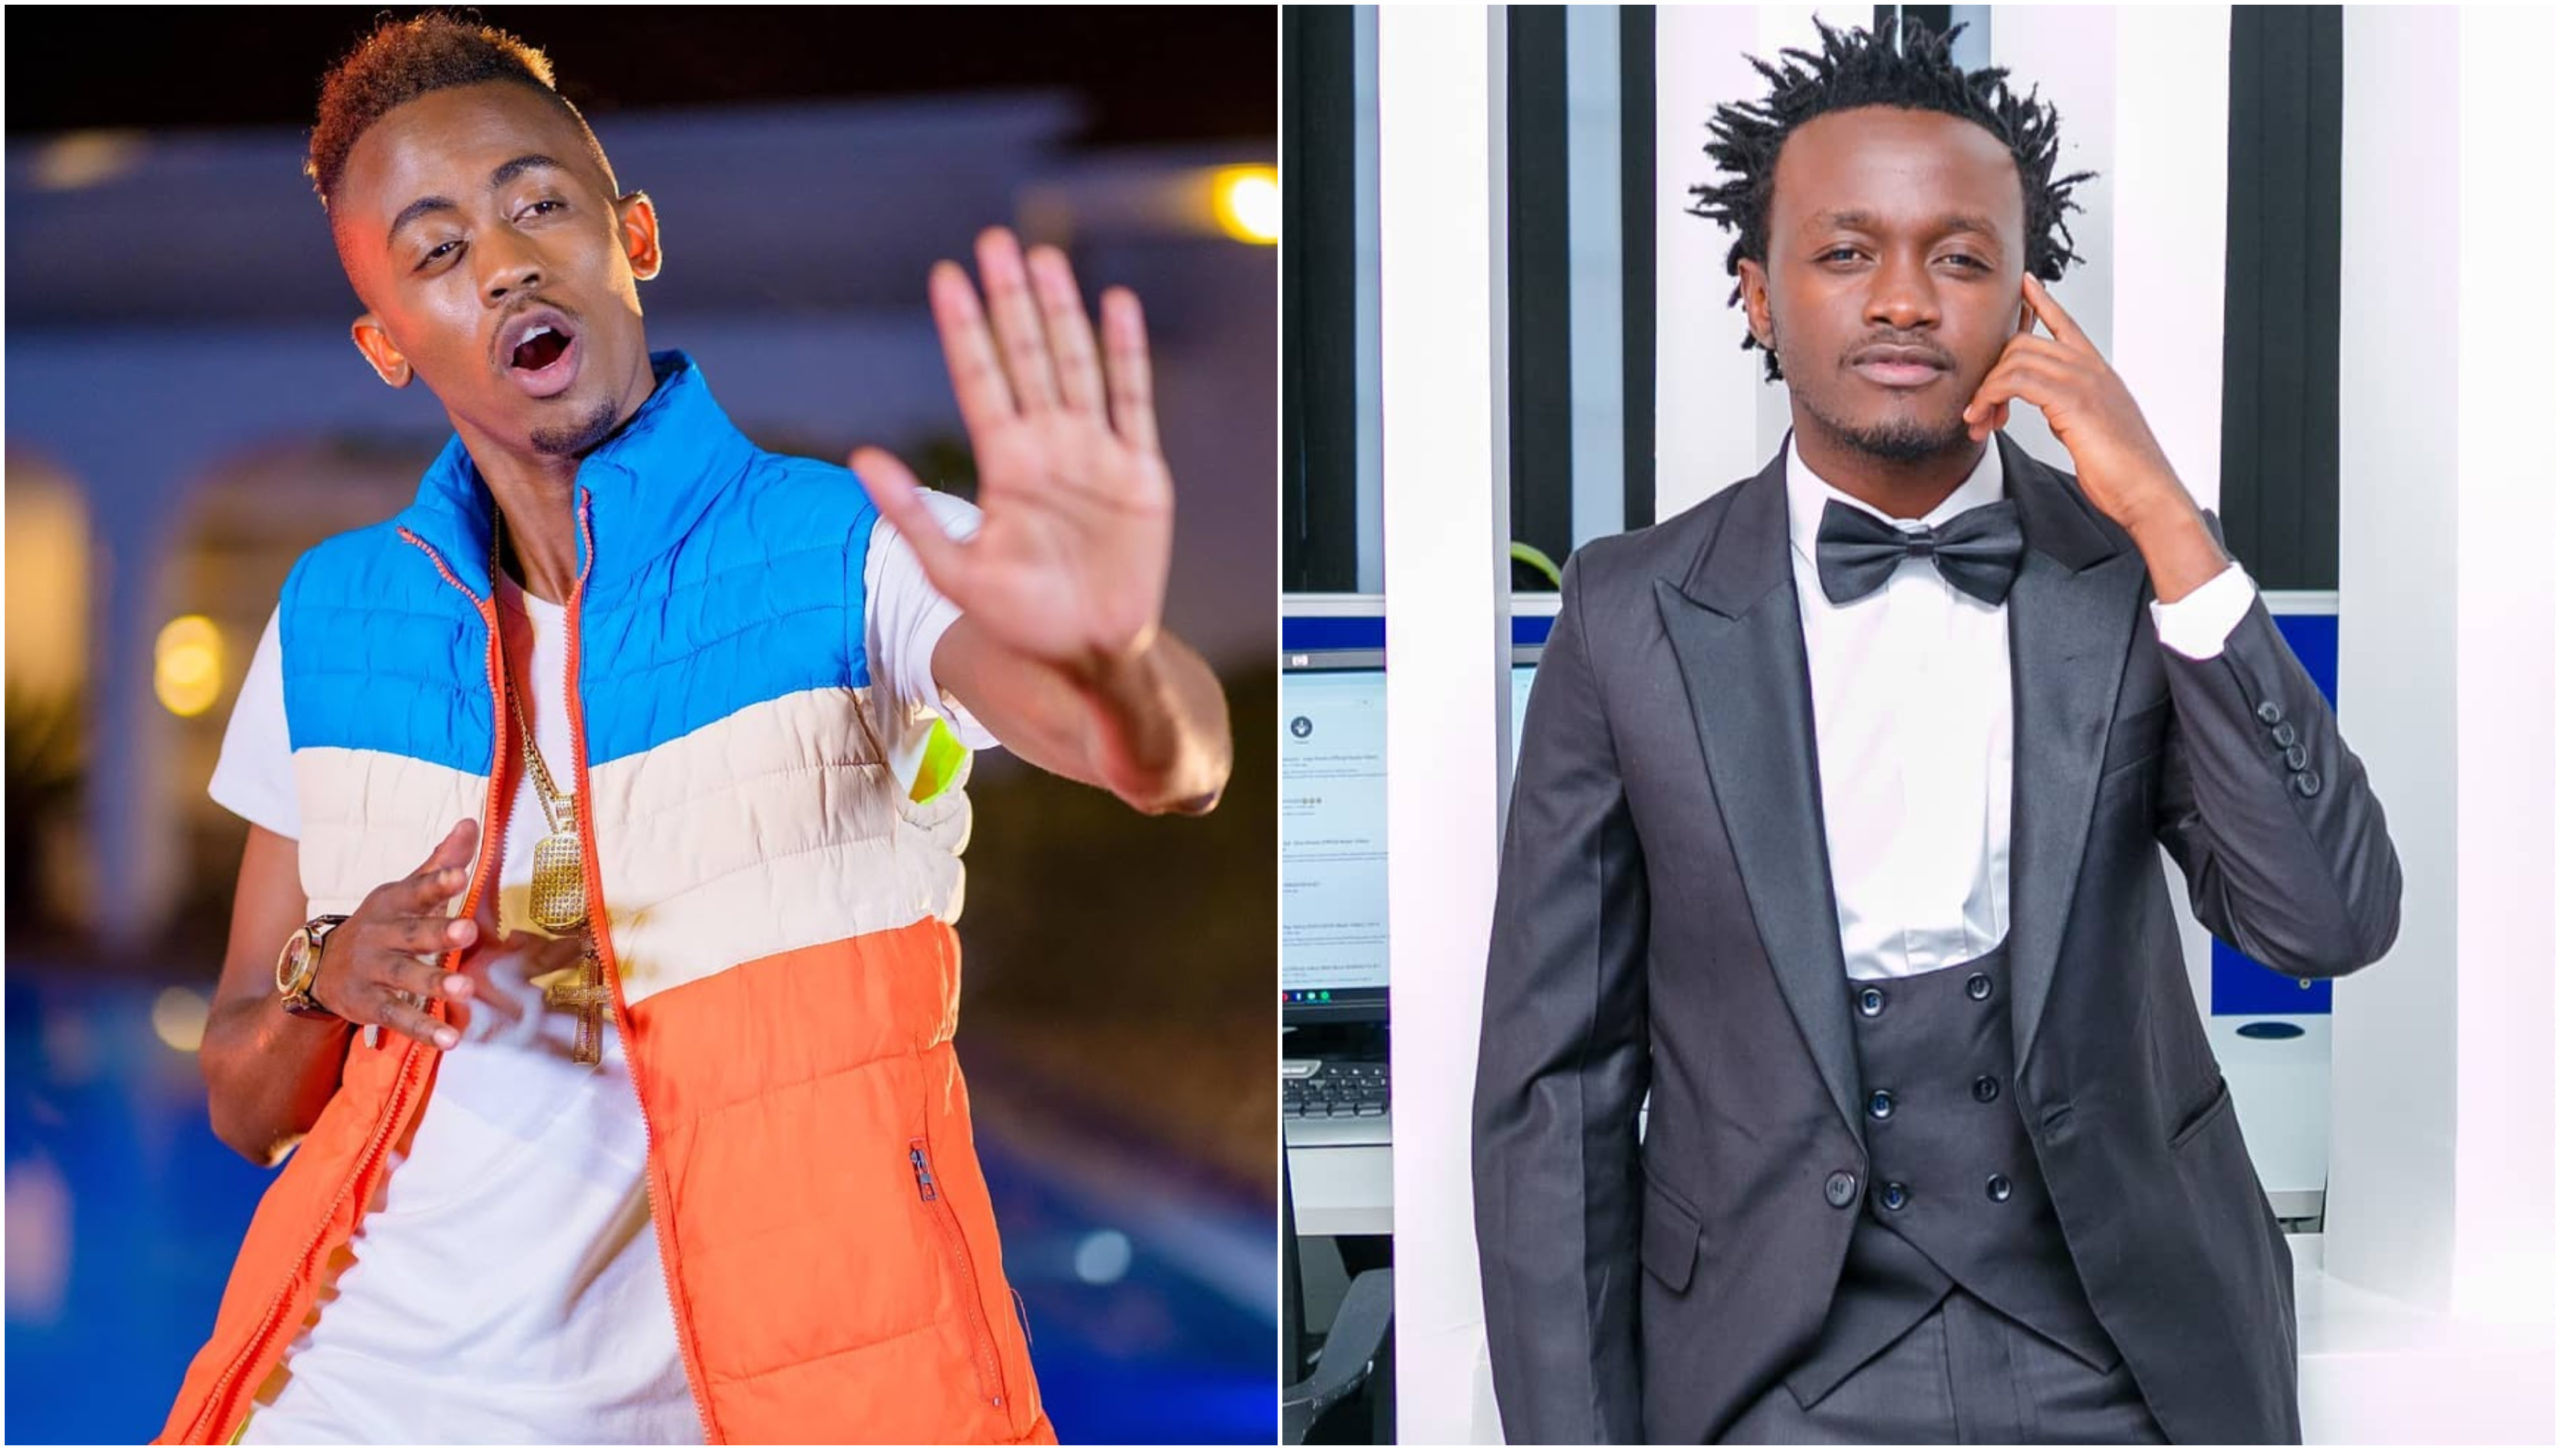 Brotherly love? Bahati and Weezdom’s relationship questioned after their intimate chats surface